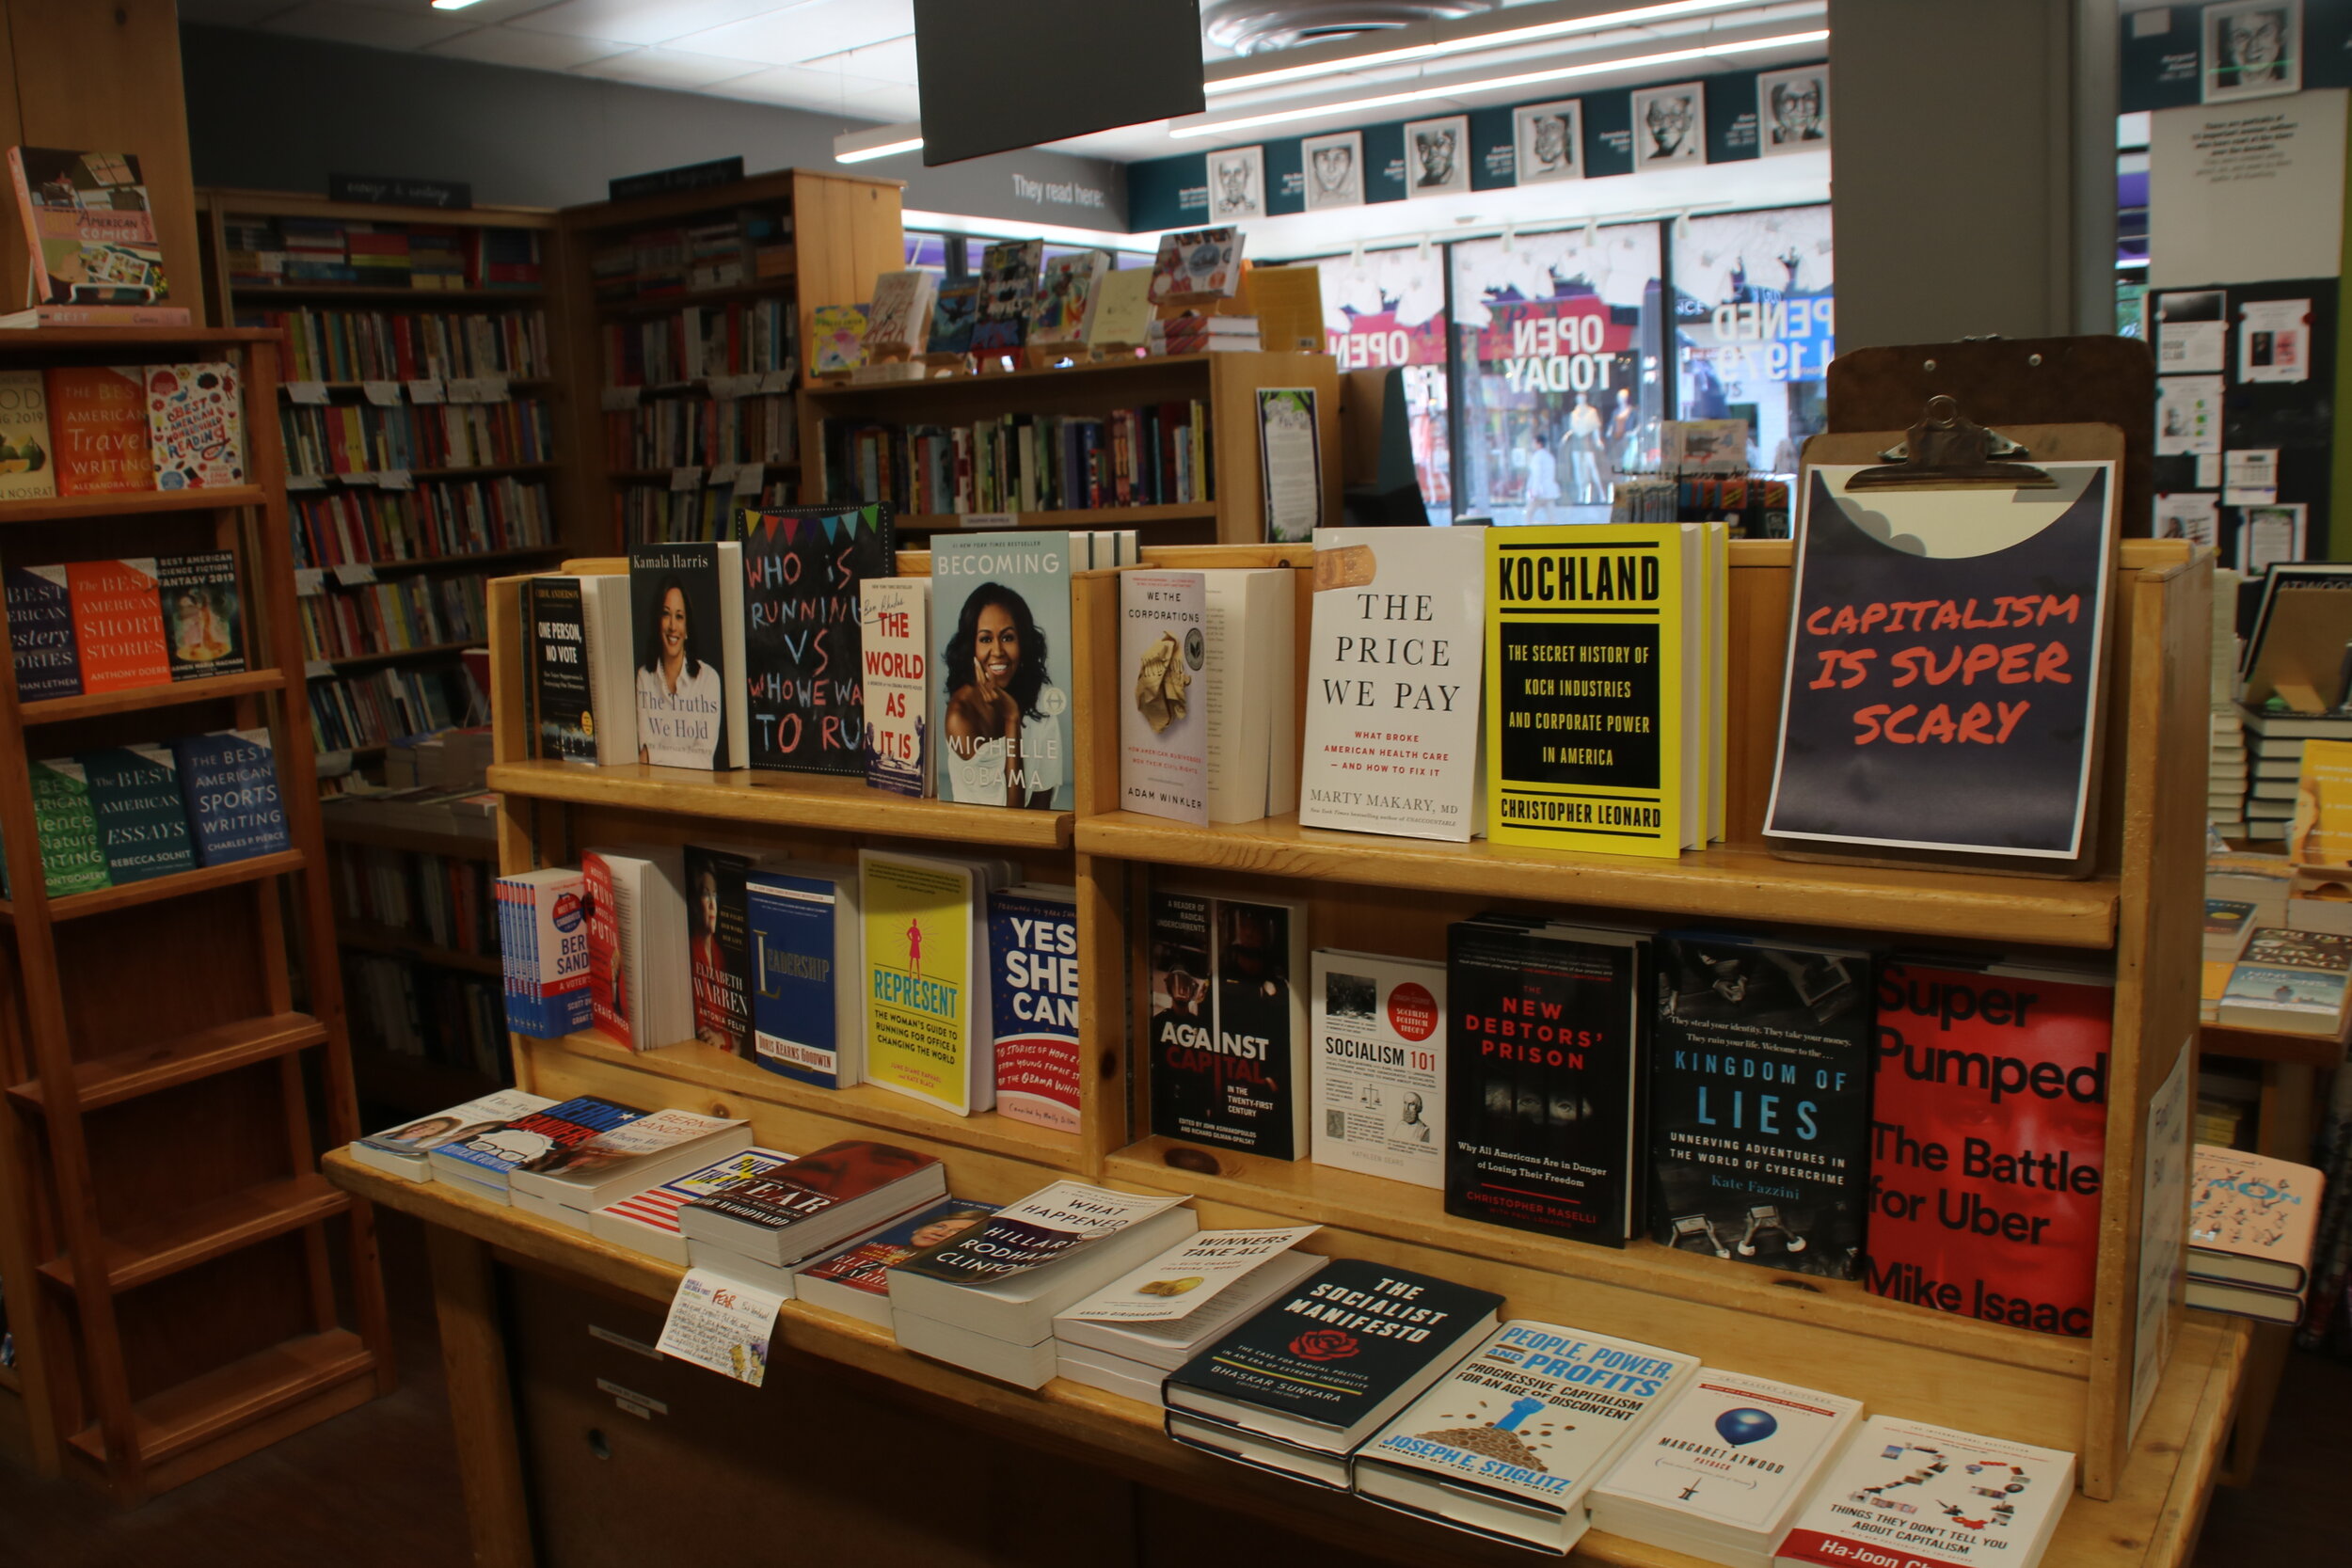 Mission oriented bookstores in Chicago thrive while cookie cutter chains  struggle to remain open — Free Spirit Media